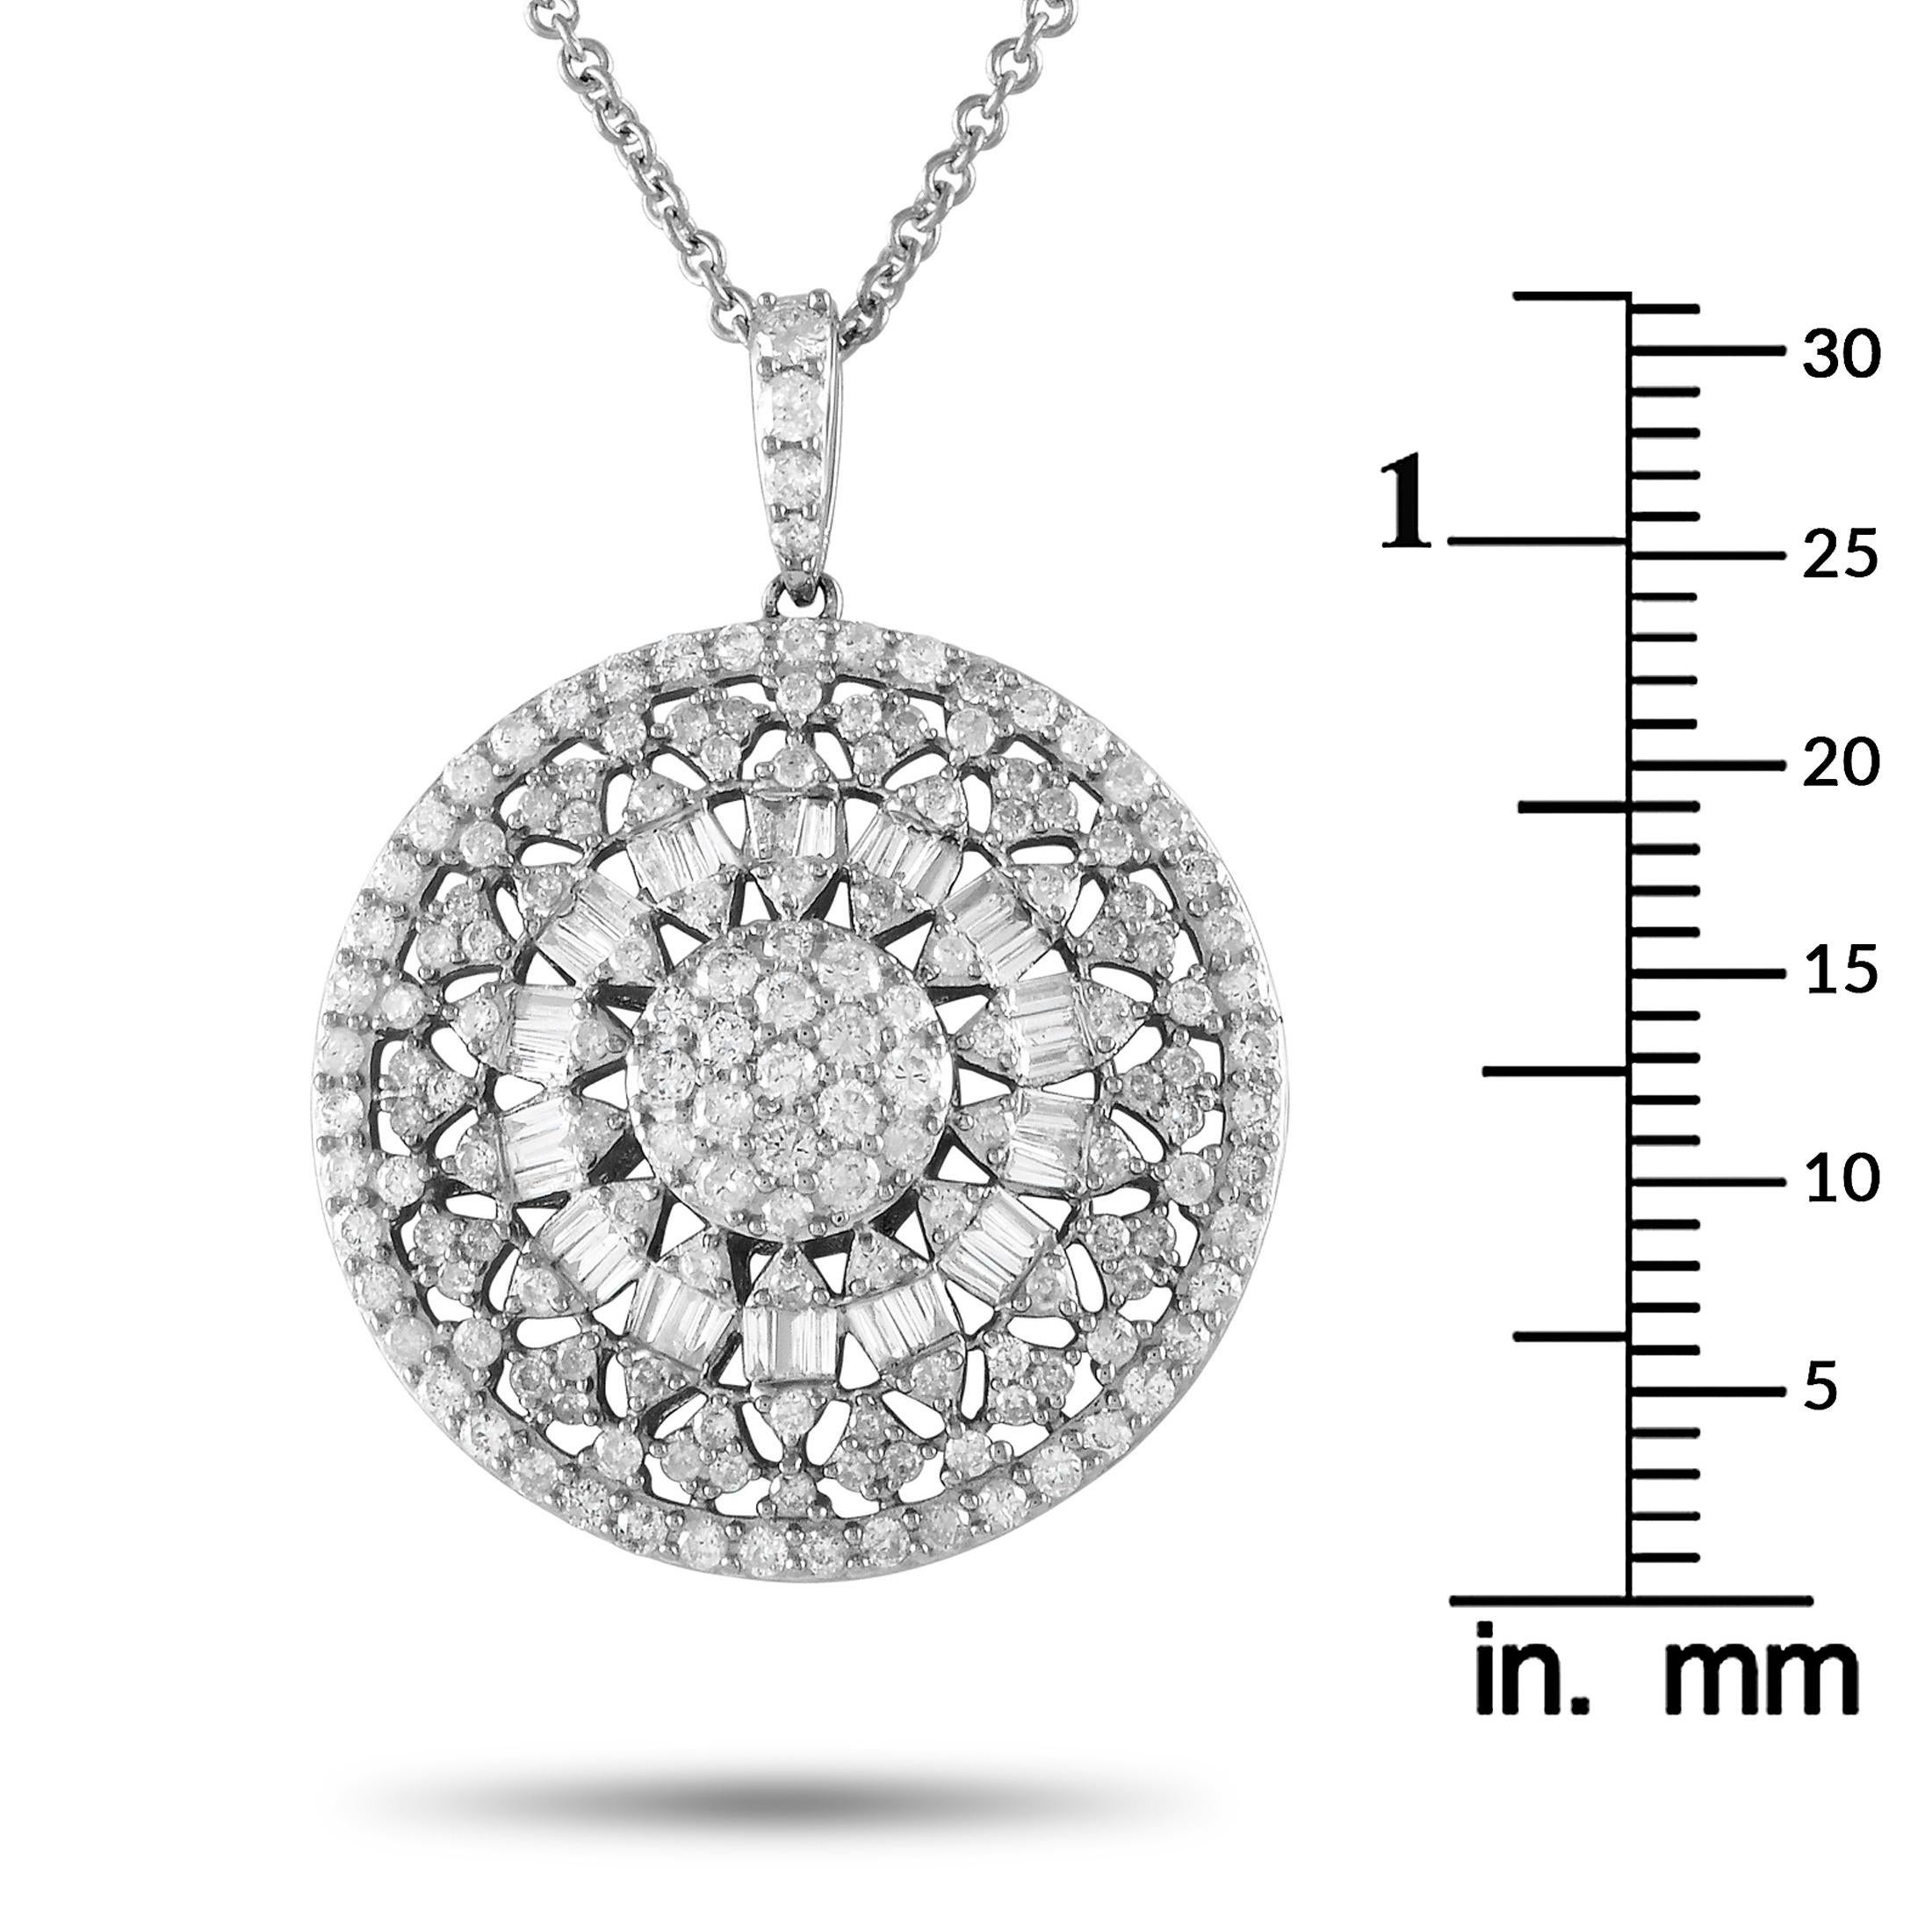 LB Exclusive 14K White Gold 1.75ct Diamond Pendant Necklace PN15063 In New Condition For Sale In Southampton, PA